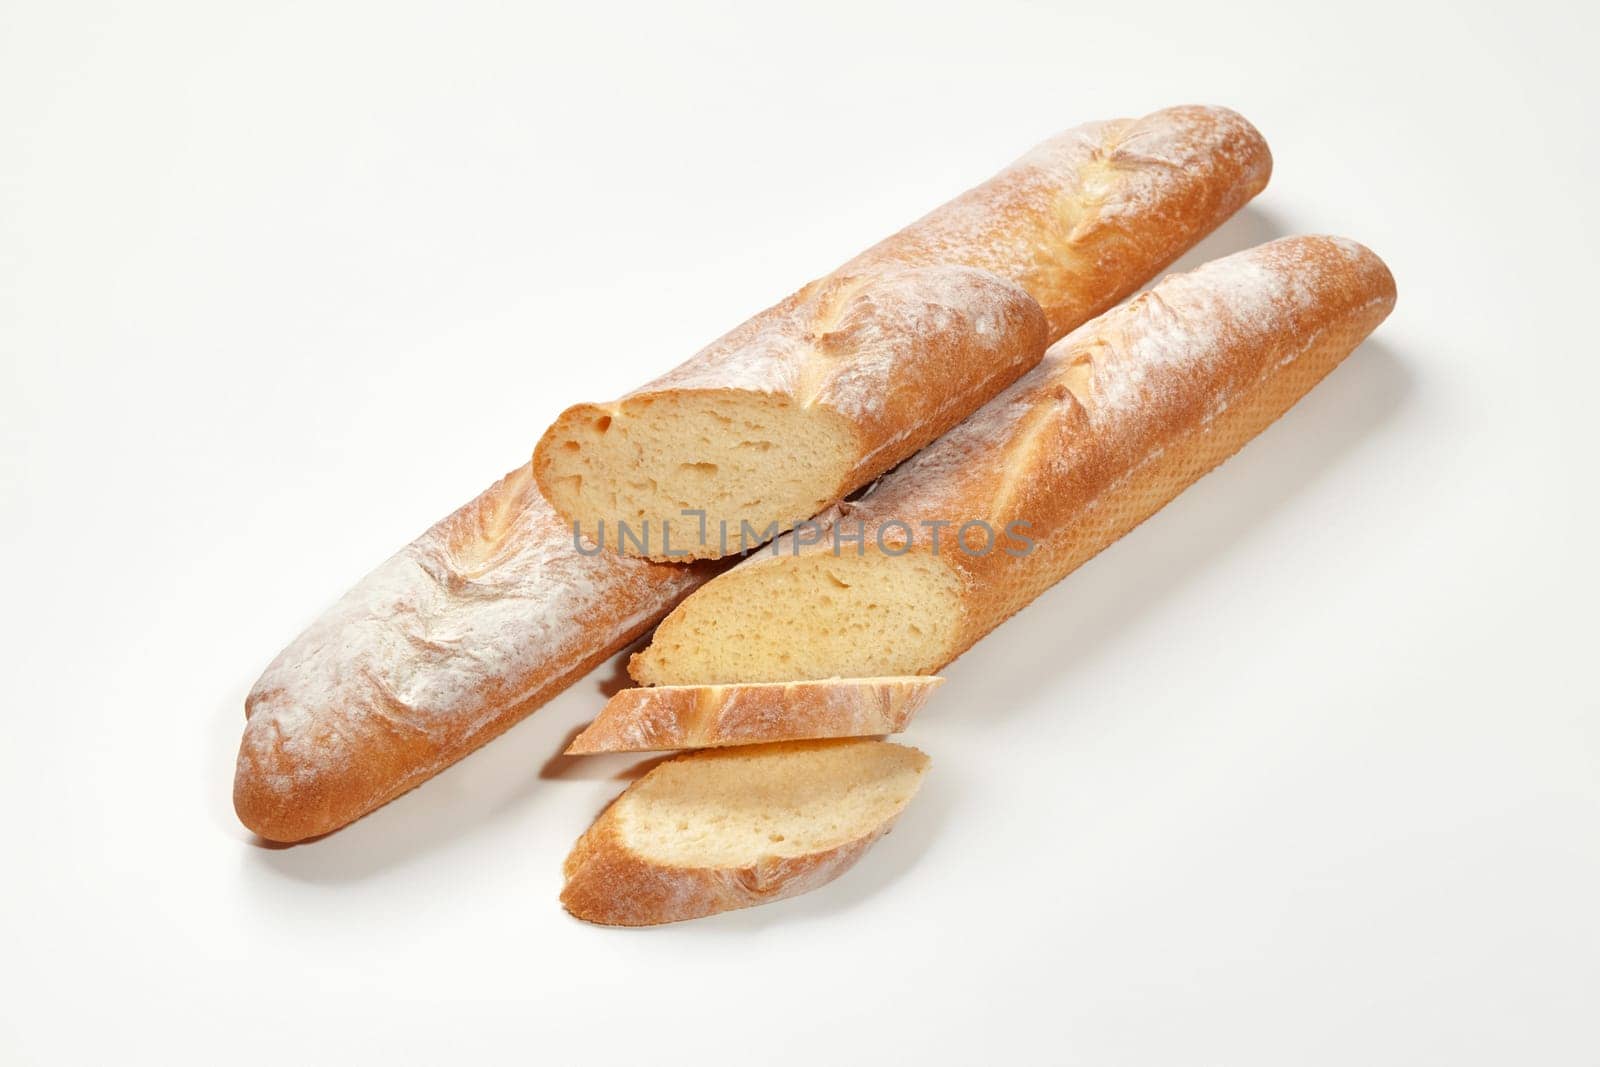 Two whole and sliced fresh French baguettes with golden crust and airy texture, isolated on white background. Traditional bakery products concept